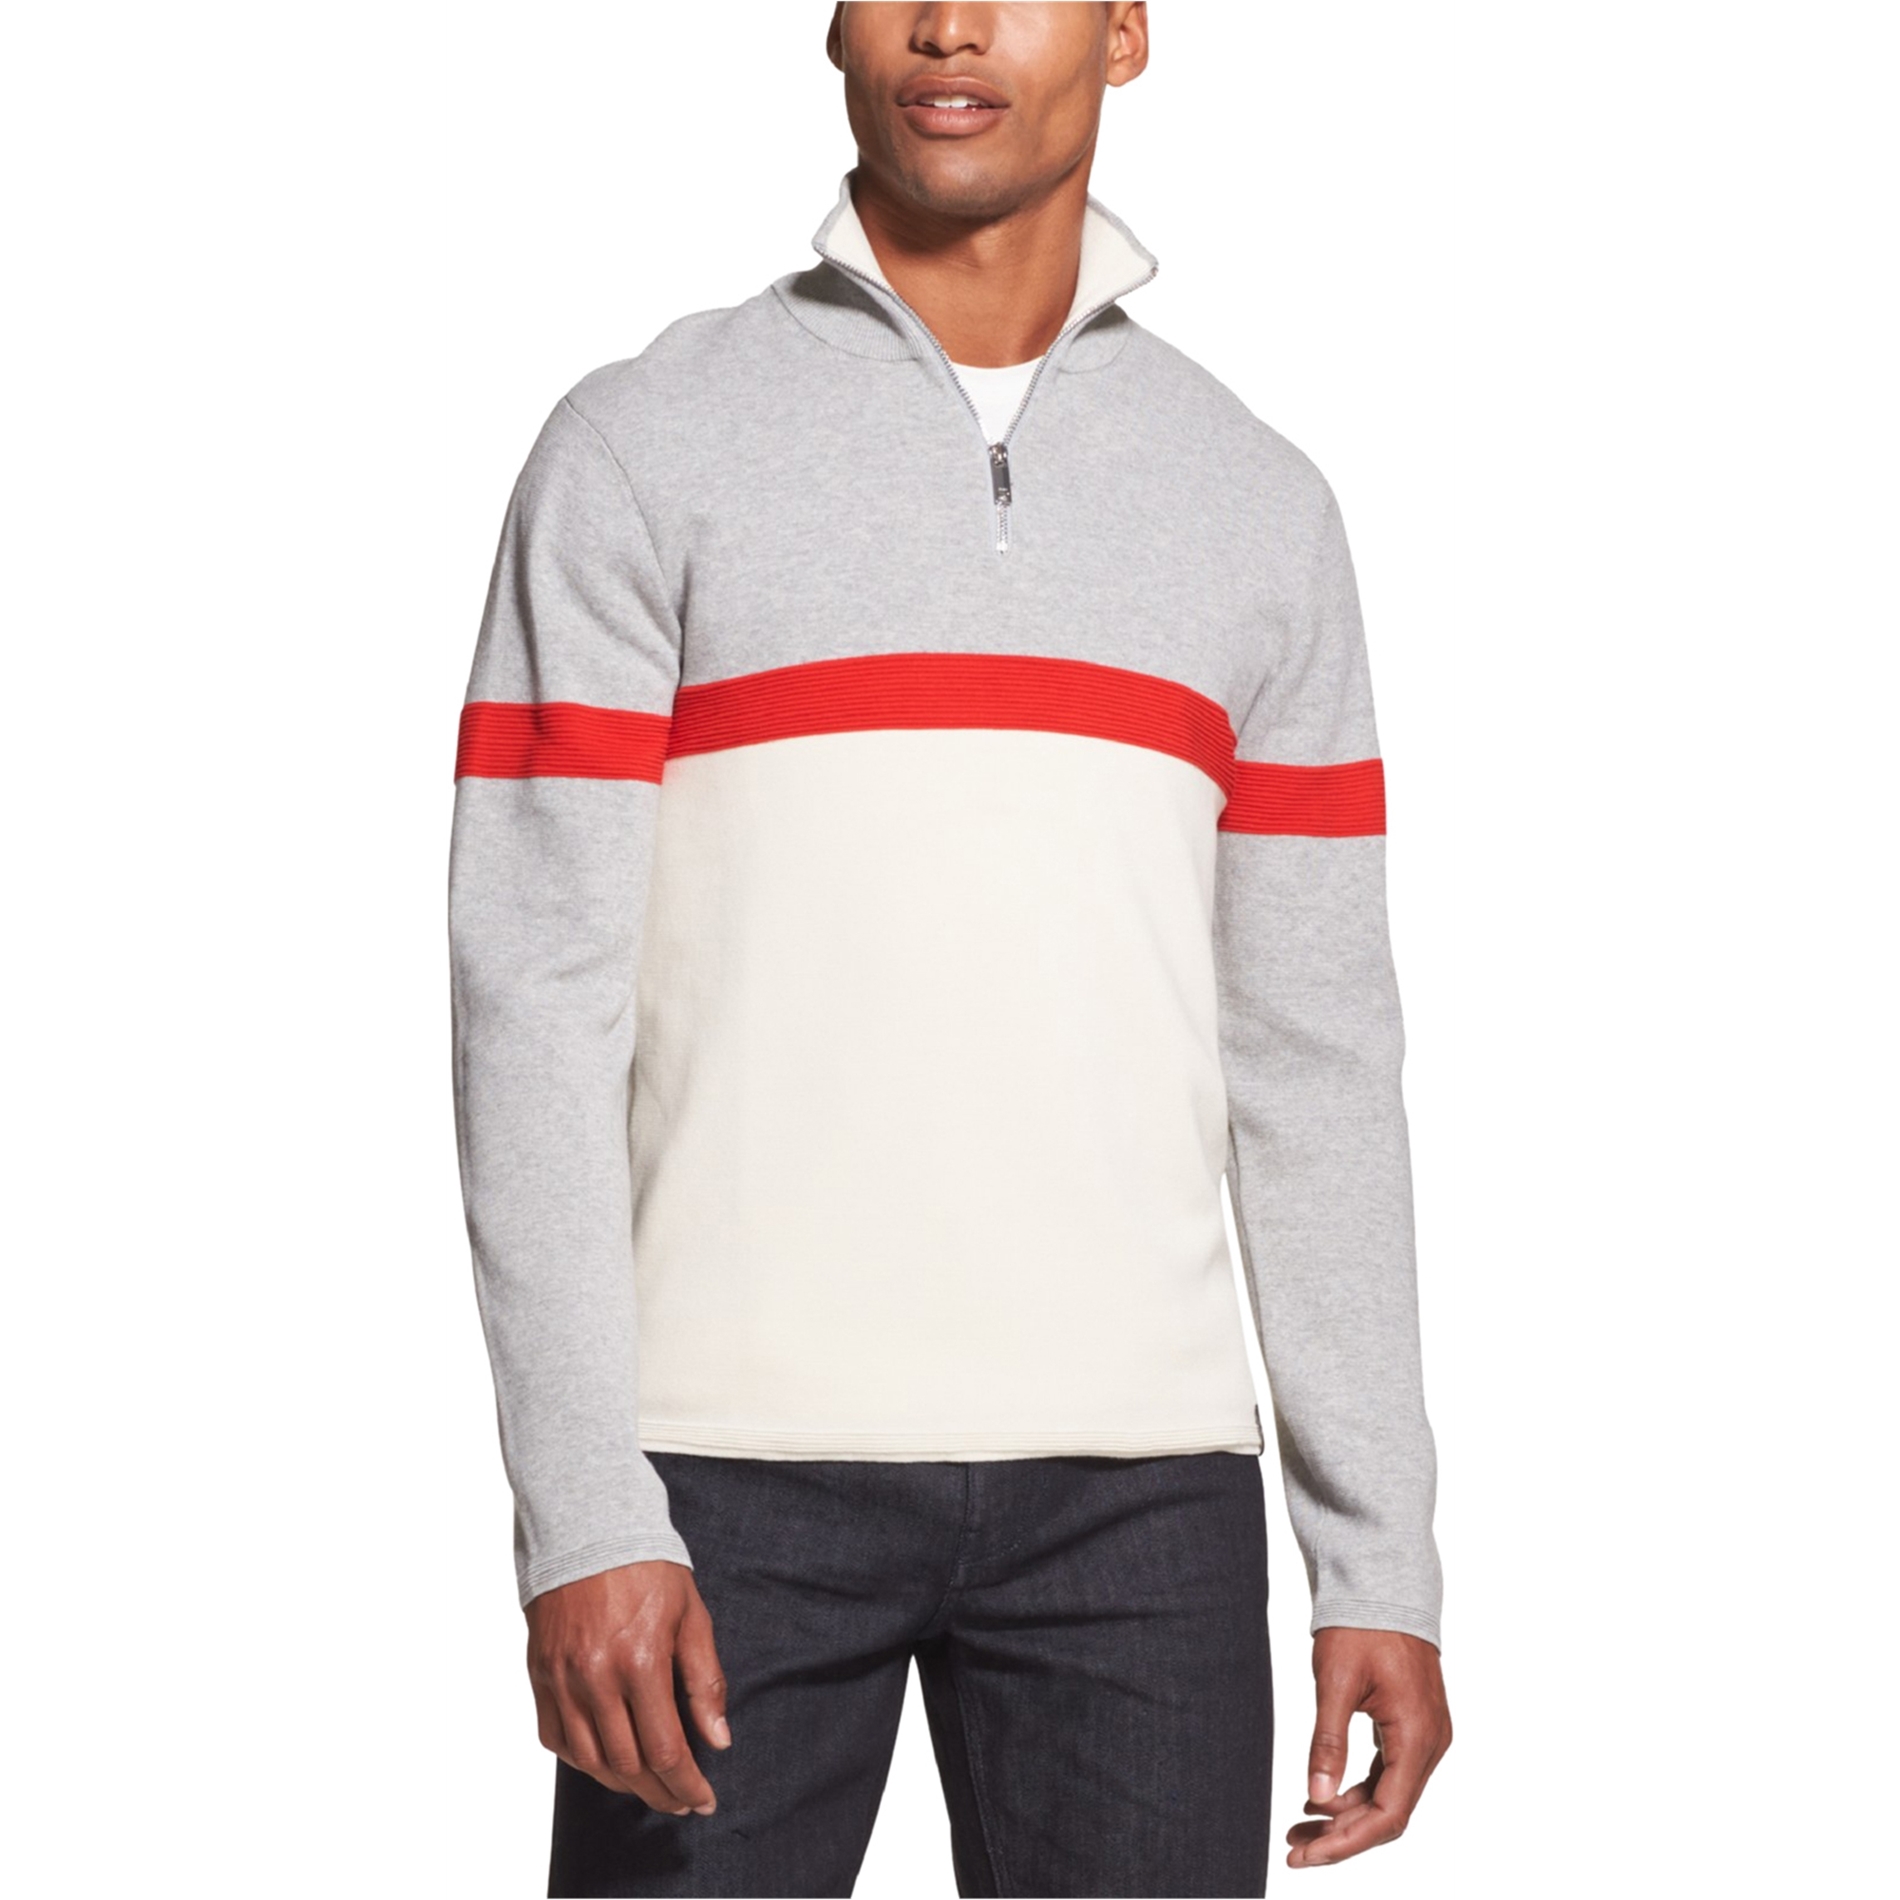 Dkny Mens Colorblocked Pullover Sweater